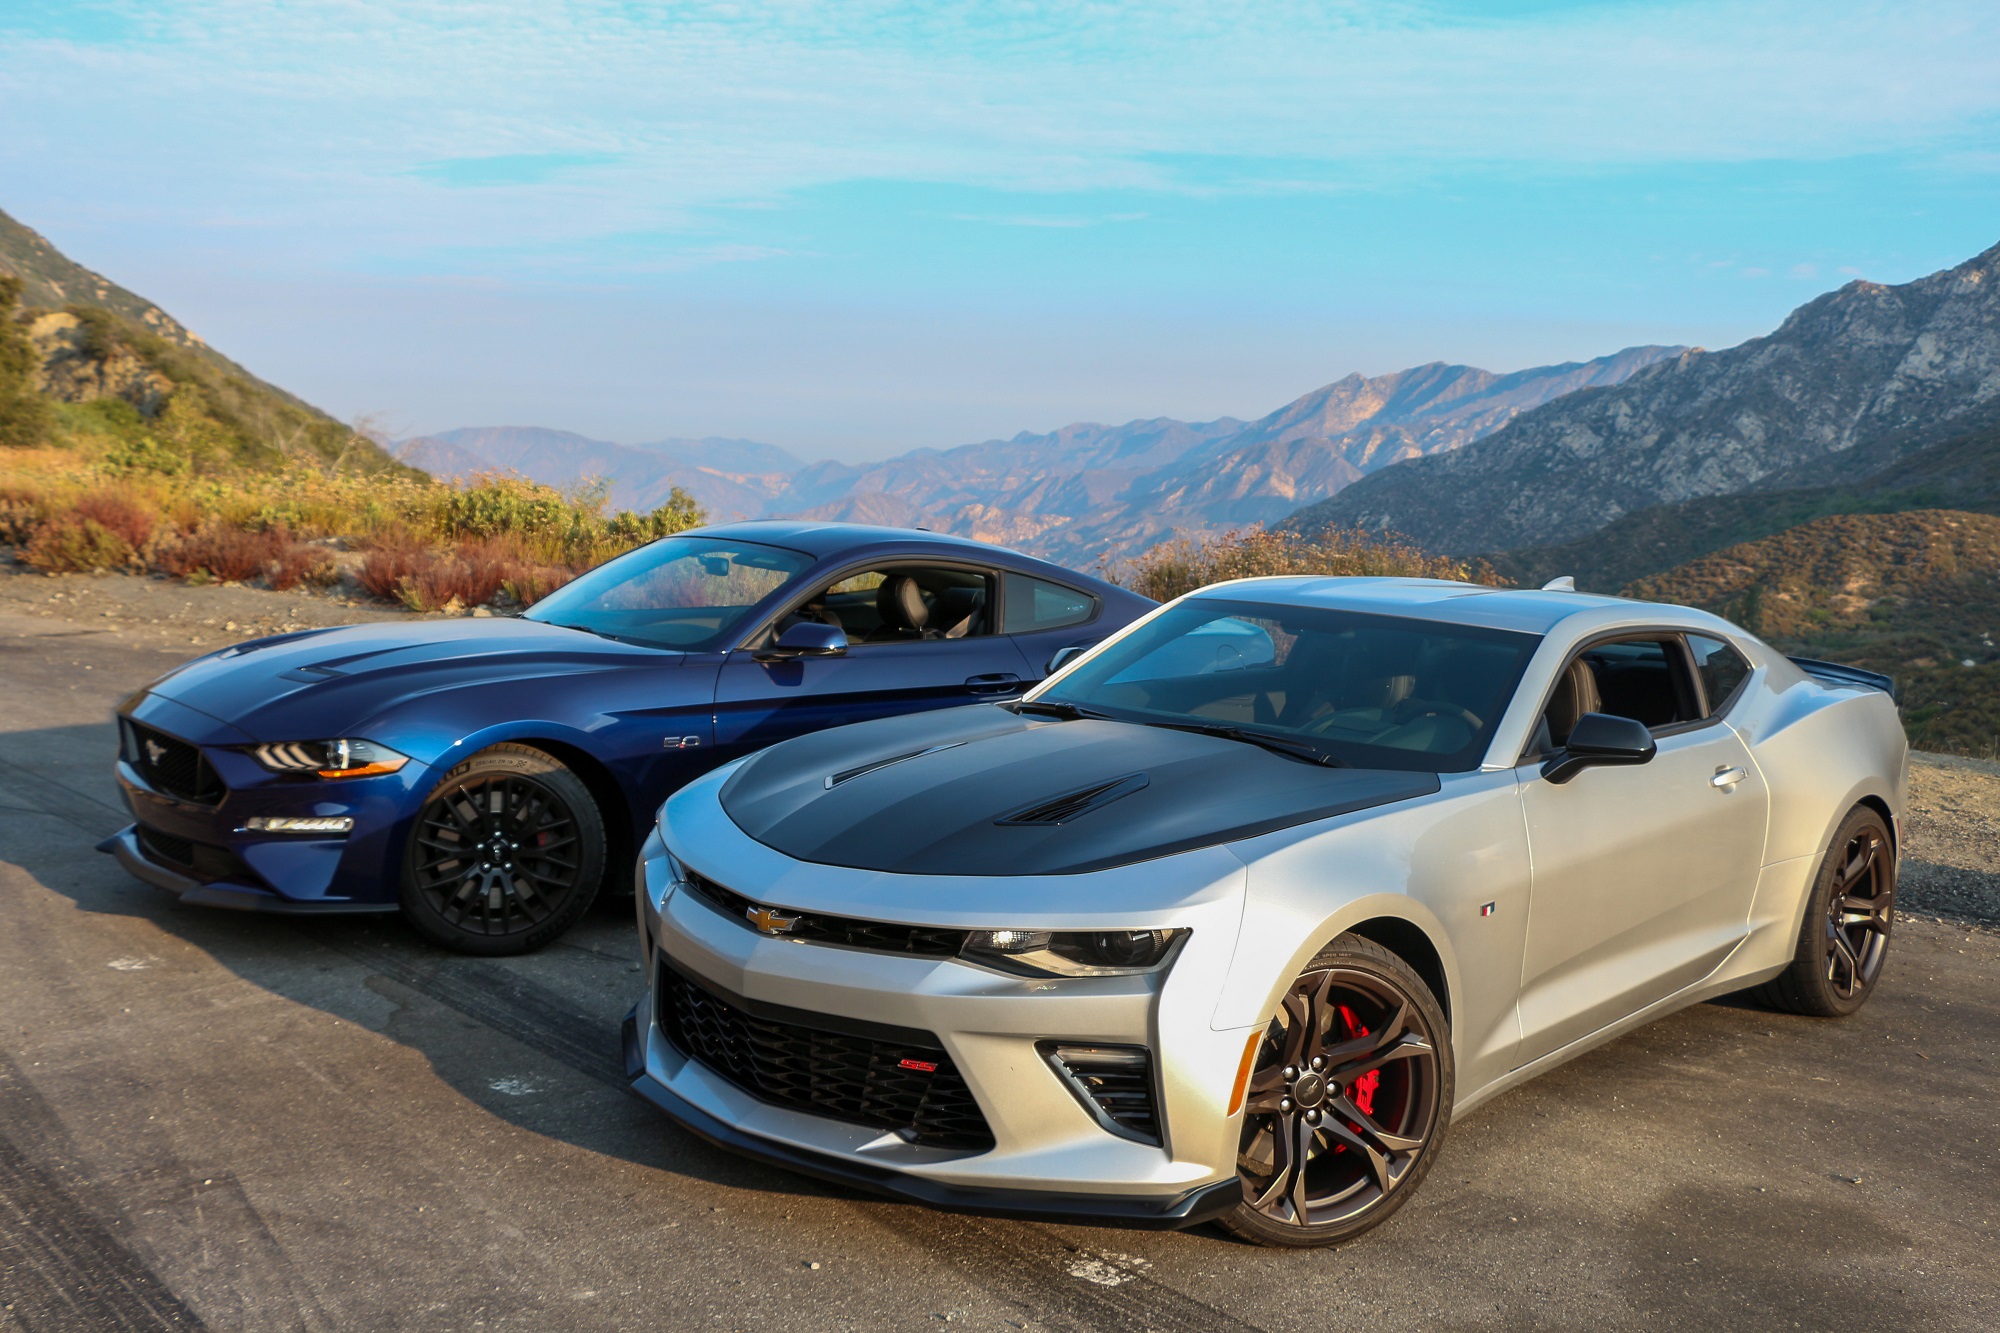 Chevrolet Chevy Camaro SS 1LE vs. Ford Mustang GT Performance Pack Comparison Review 2018 2019 Muscle Cars Sports Cars America American LS1tech.com Jake Stumph